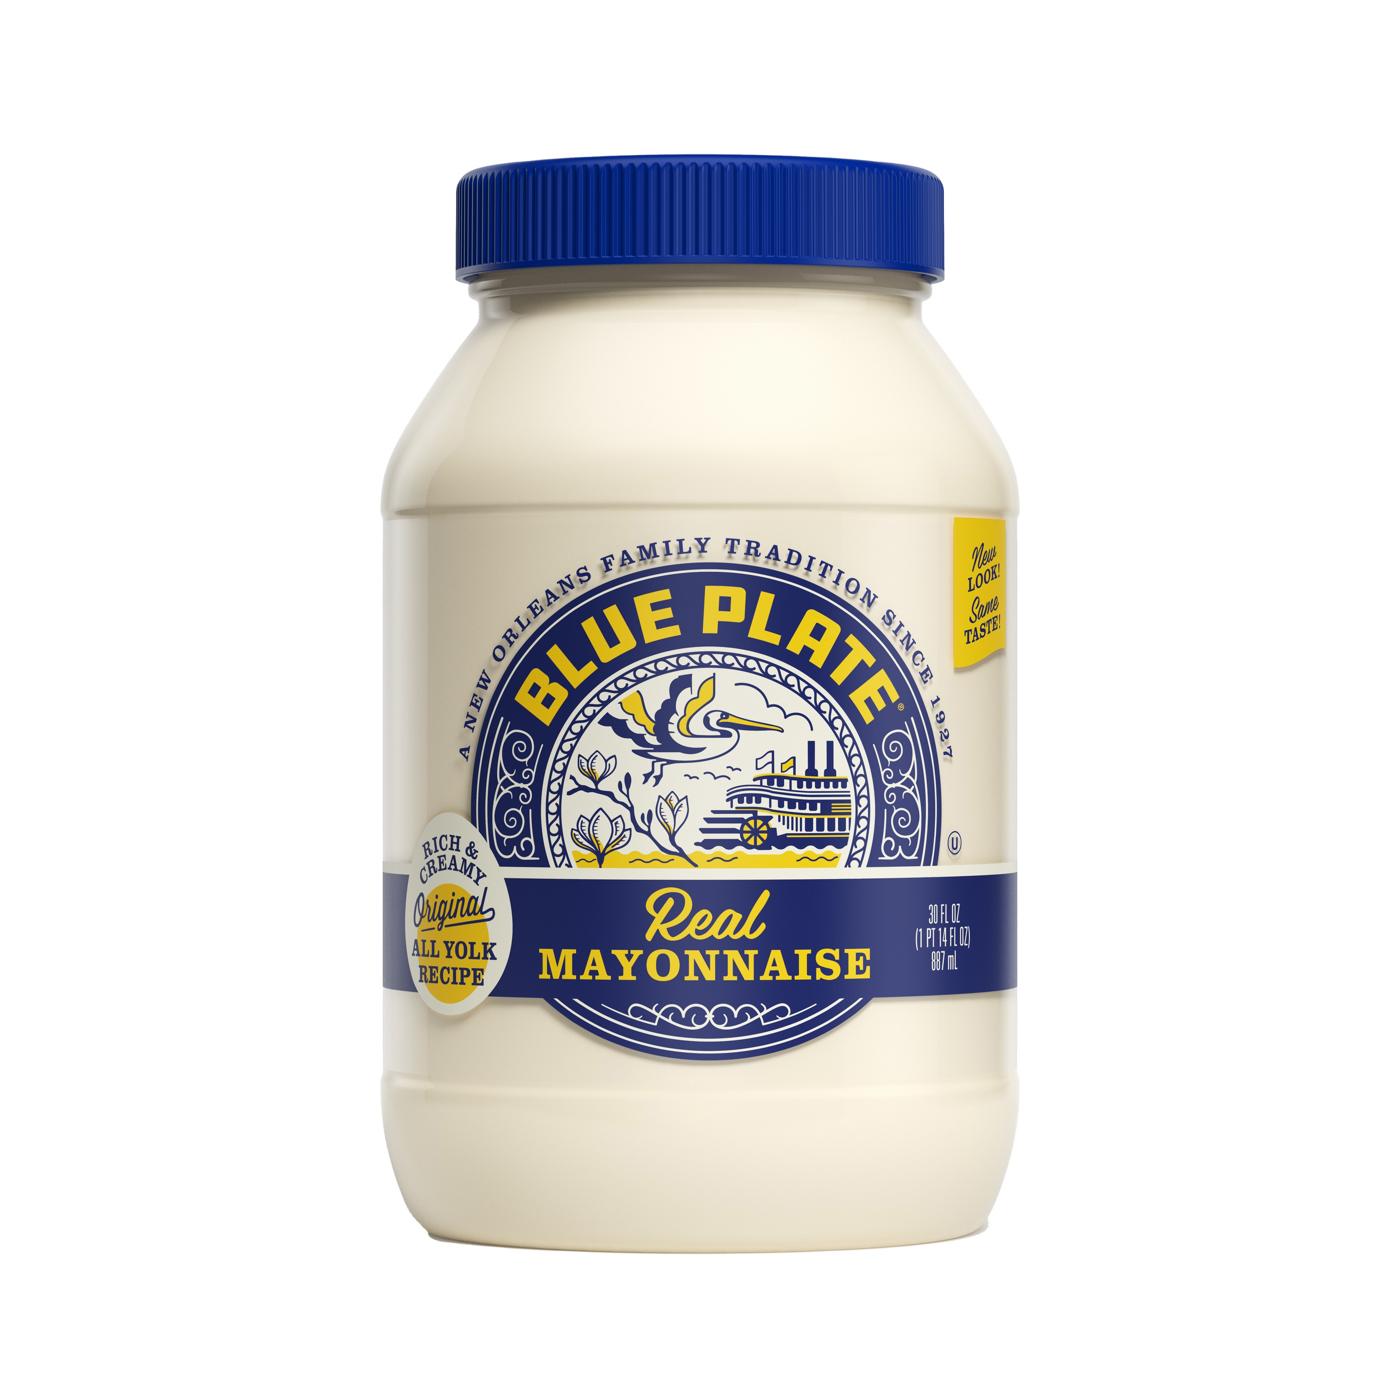 Blue Plate Real Mayonnaise; image 1 of 2